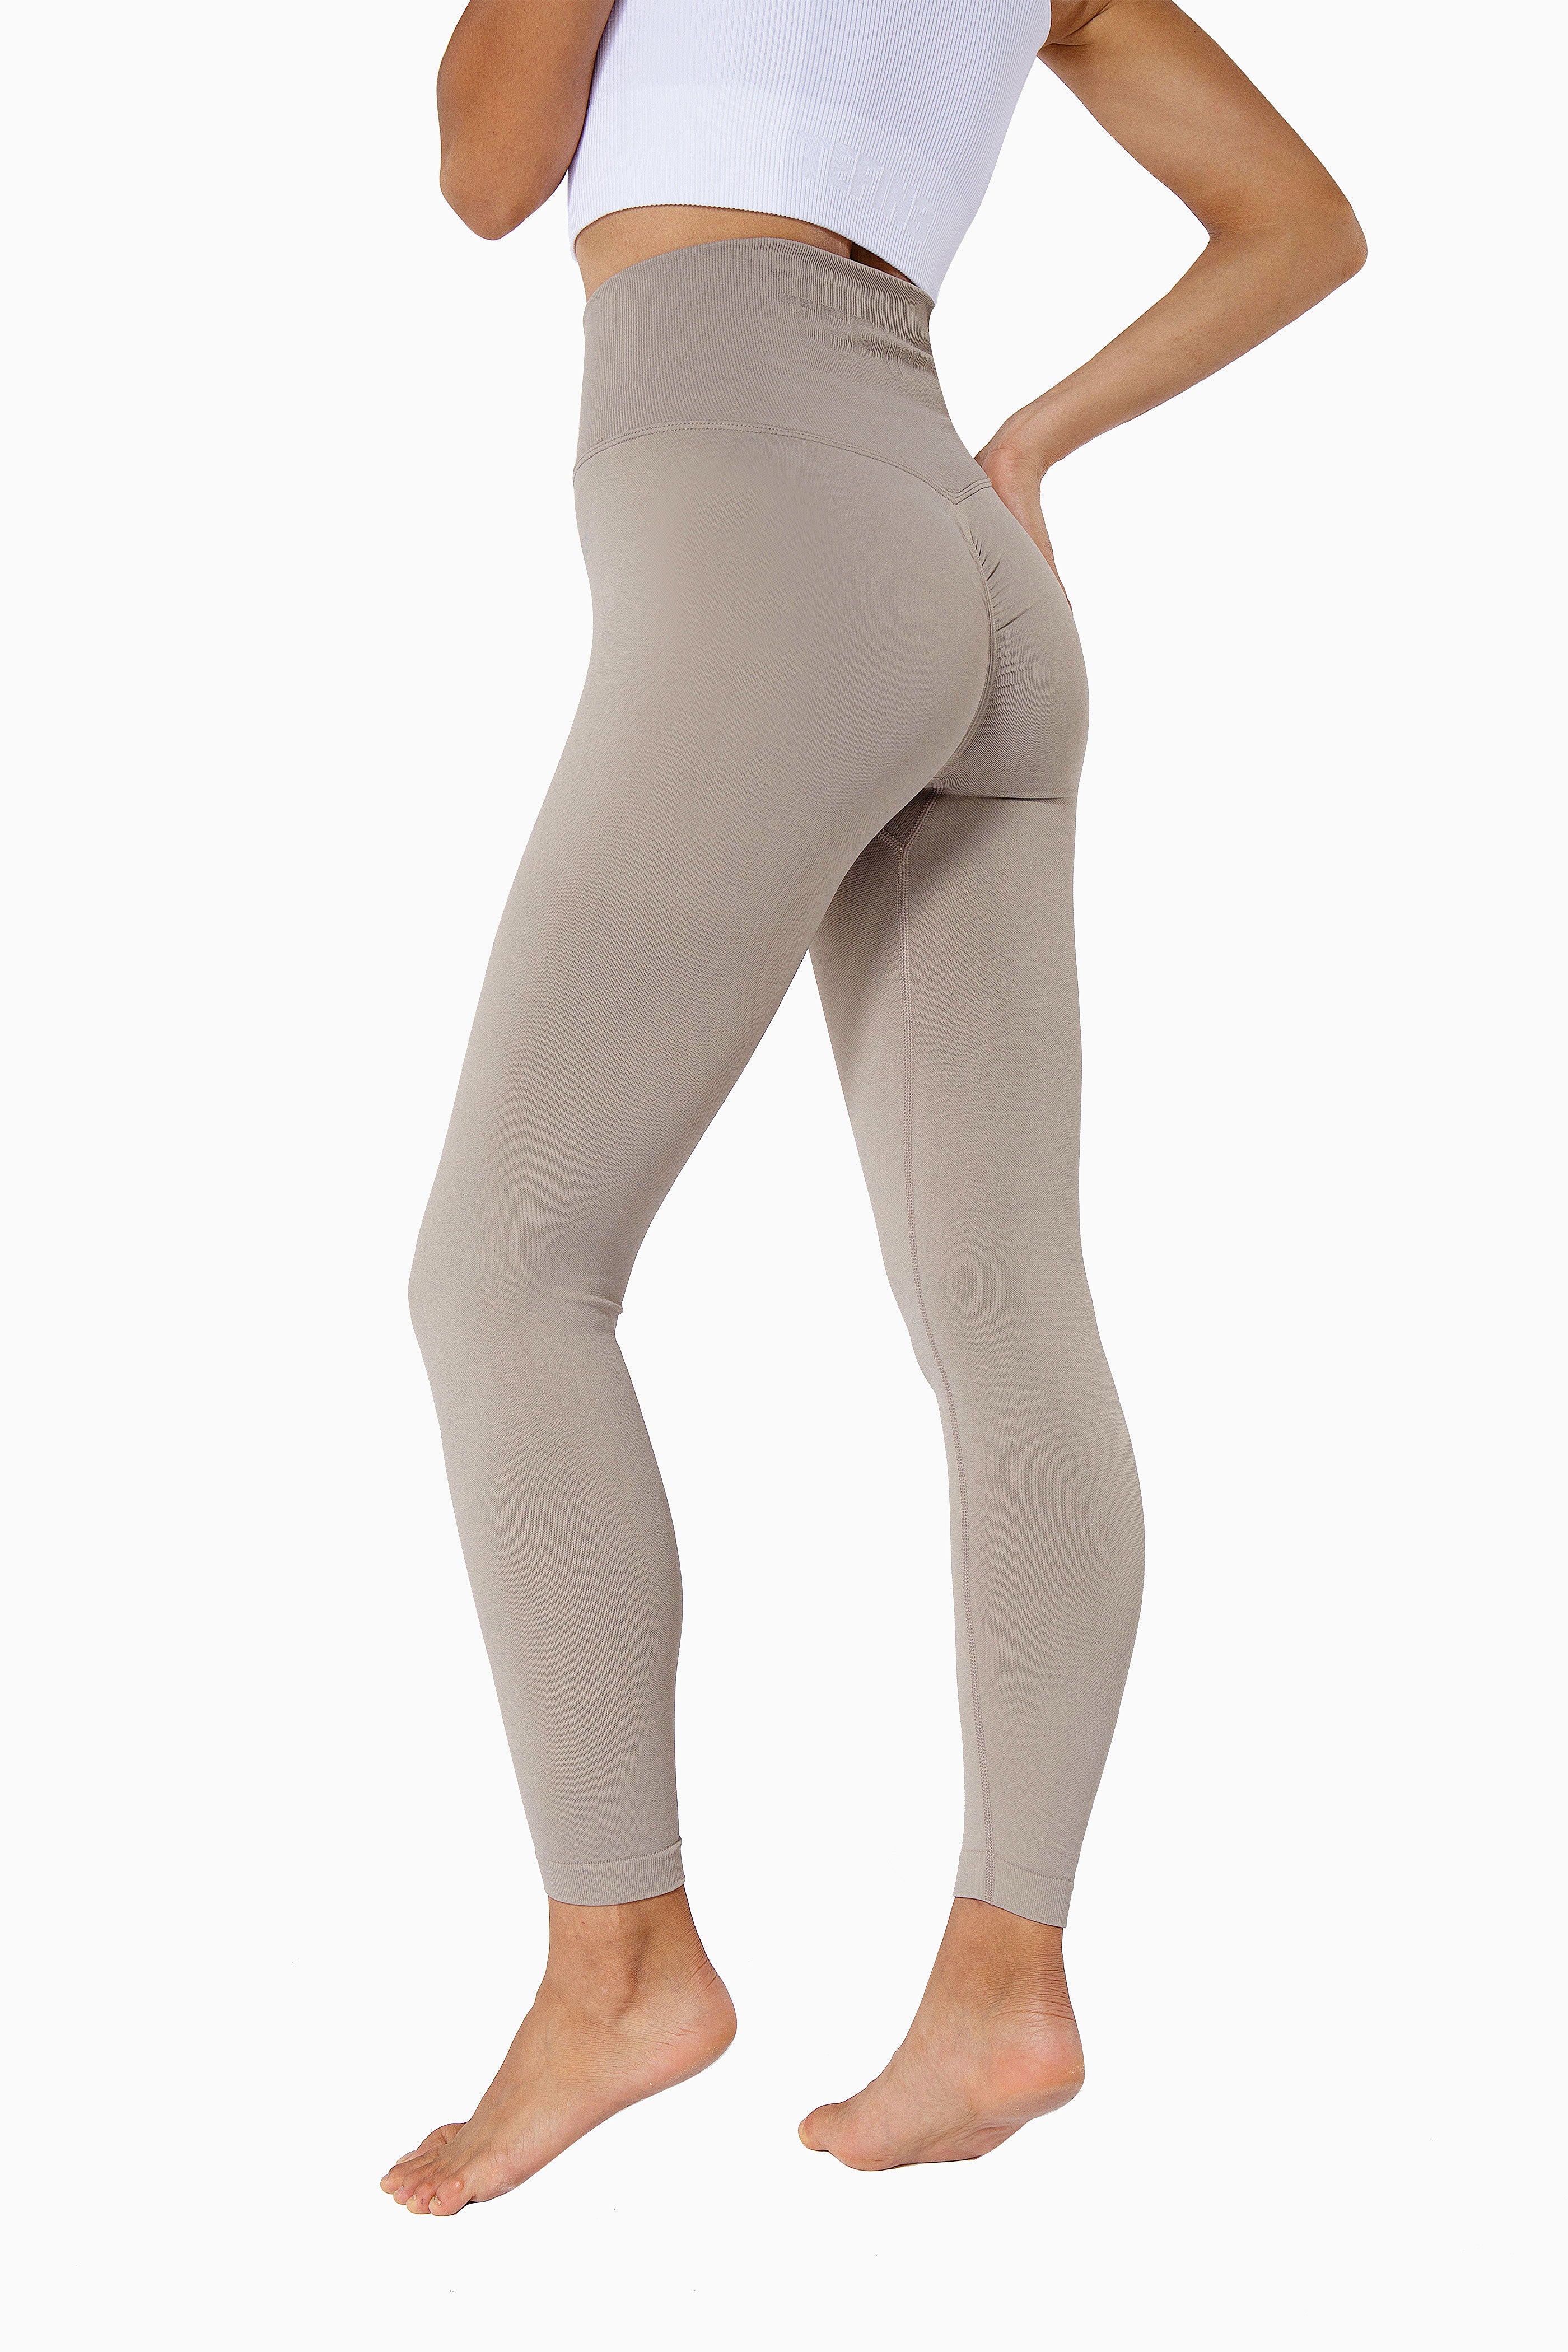 Personalized Wholesale Textured Scrunch Butt Fleece Women Seamless Leggings  Manufacturers In USA, AUS, CA And UAE